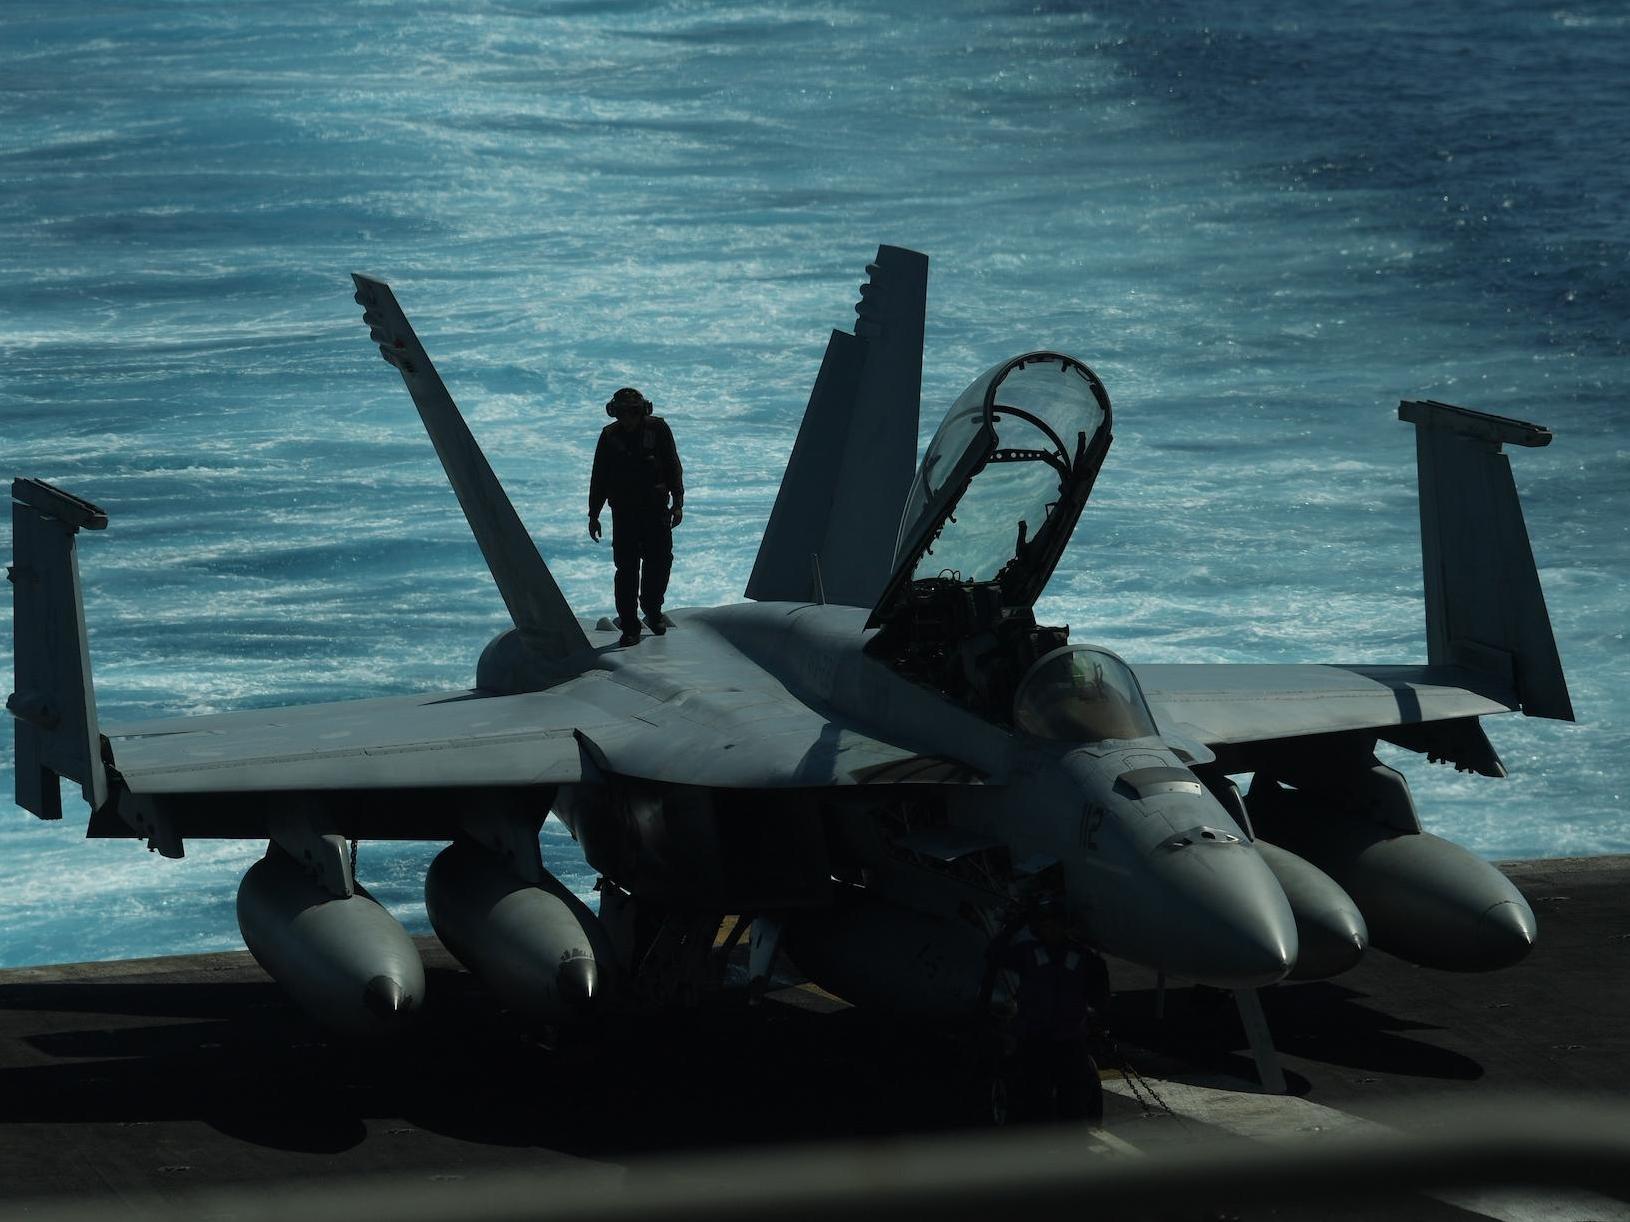 A US sailor inspects a FA-18 hornet fighter jet during a routine training in the South China Sea. The US has stepped up its naval patrols in the region in recent months.